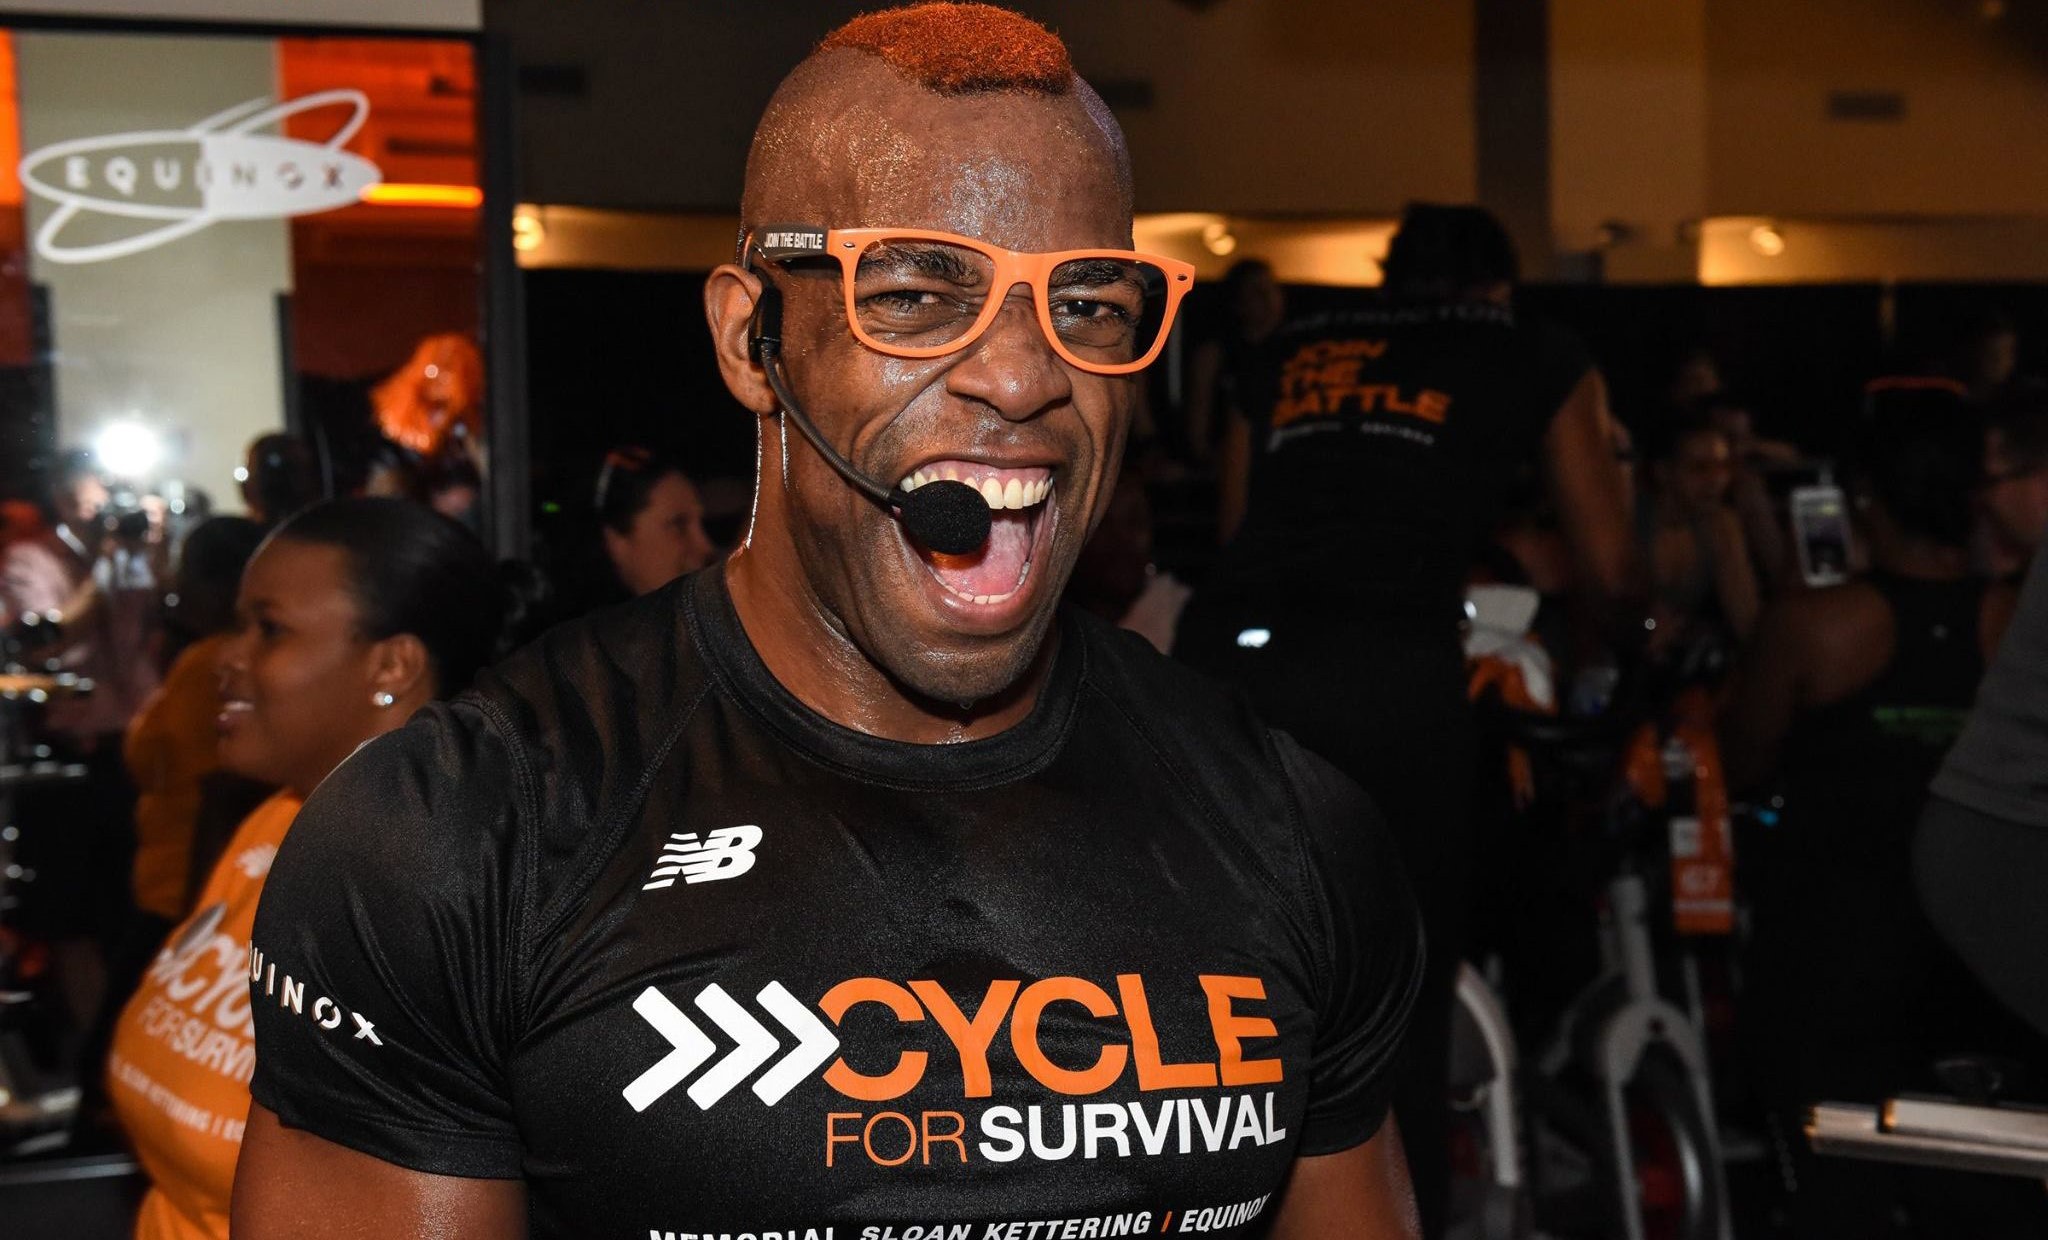 Mario Godiva as a media spokesperson for Equinox and Cycle for Survival